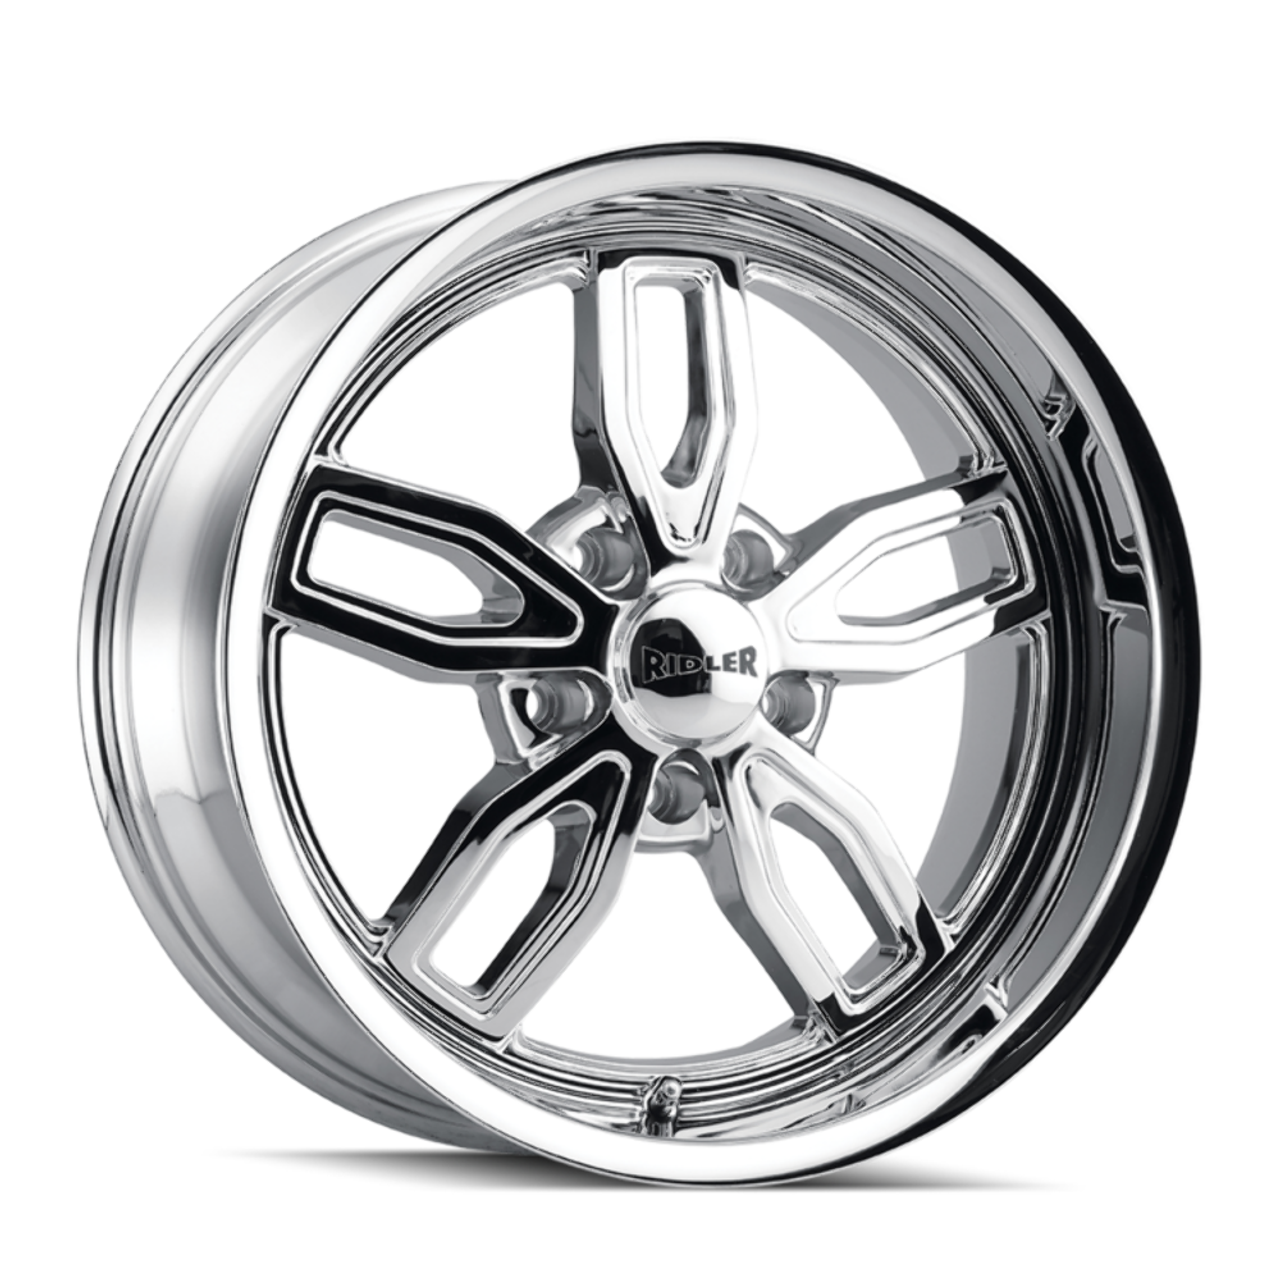 Set 4 18" Ridler 608 18x8 Chrome 5x4.5 Wheels 0mm Rims For Ford Jeep Truck